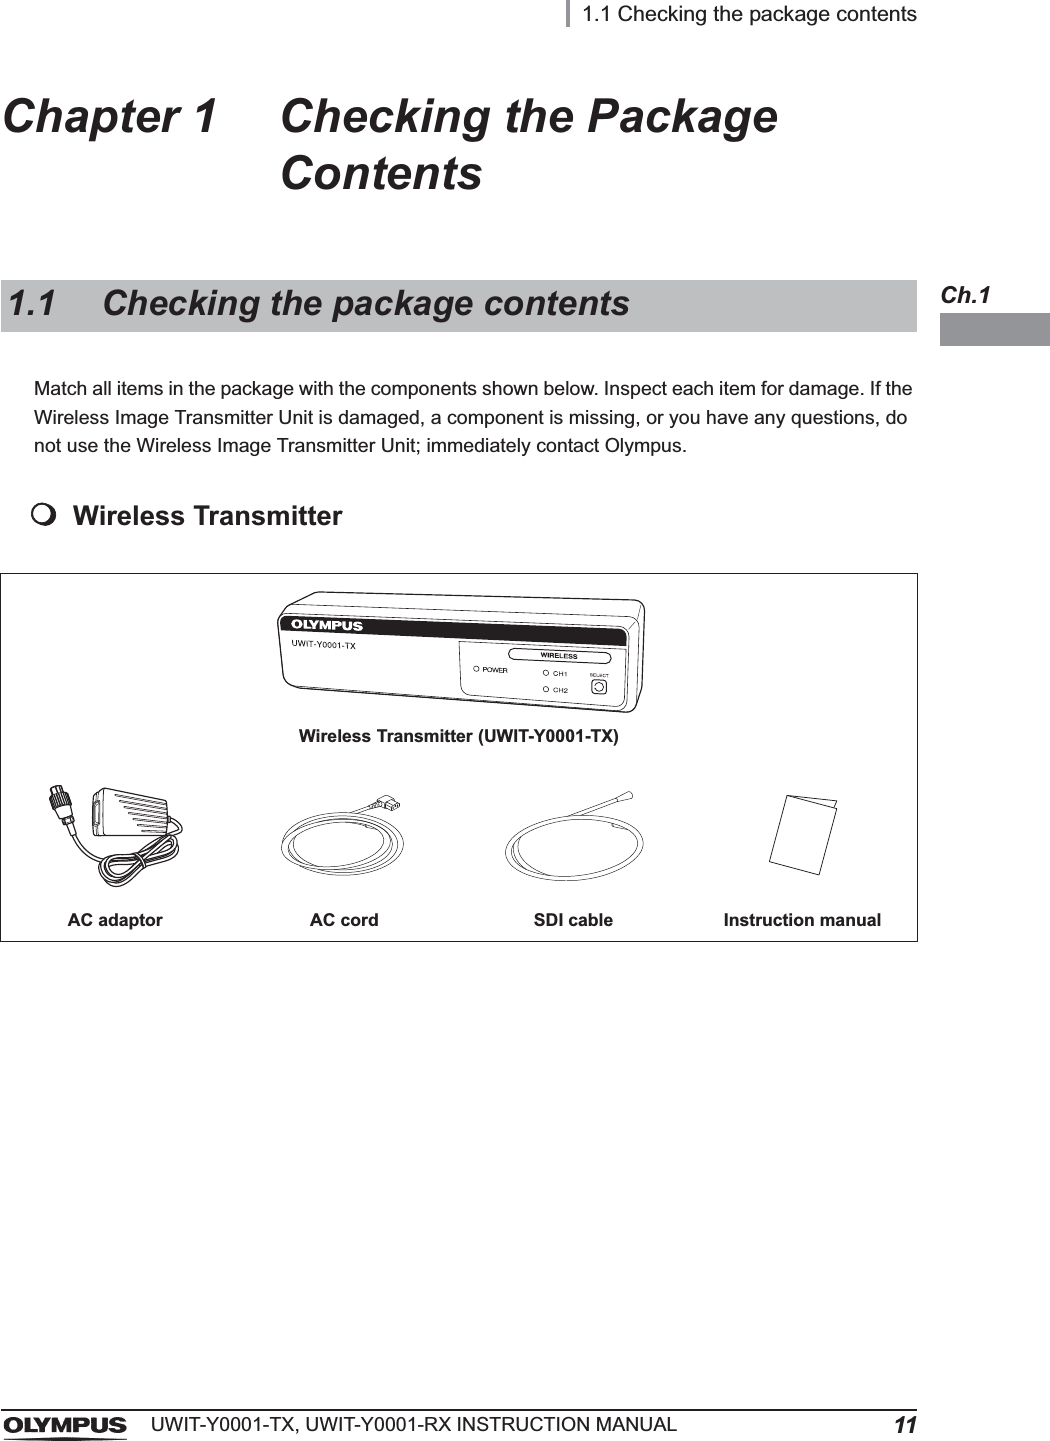 1.1 Checking the package contents11UWIT-Y0001-TX, UWIT-Y0001-RX INSTRUCTION MANUALCh.1Chapter 1 Checking the Package ContentsMatch all items in the package with the components shown below. Inspect each item for damage. If the Wireless Image Transmitter Unit is damaged, a component is missing, or you have any questions, do not use the Wireless Image Transmitter Unit; immediately contact Olympus.Wireless Transmitter1.1 Checking the package contentsWireless Transmitter (UWIT-Y0001-TX)AC adaptor AC cord SDI cable Instruction manual